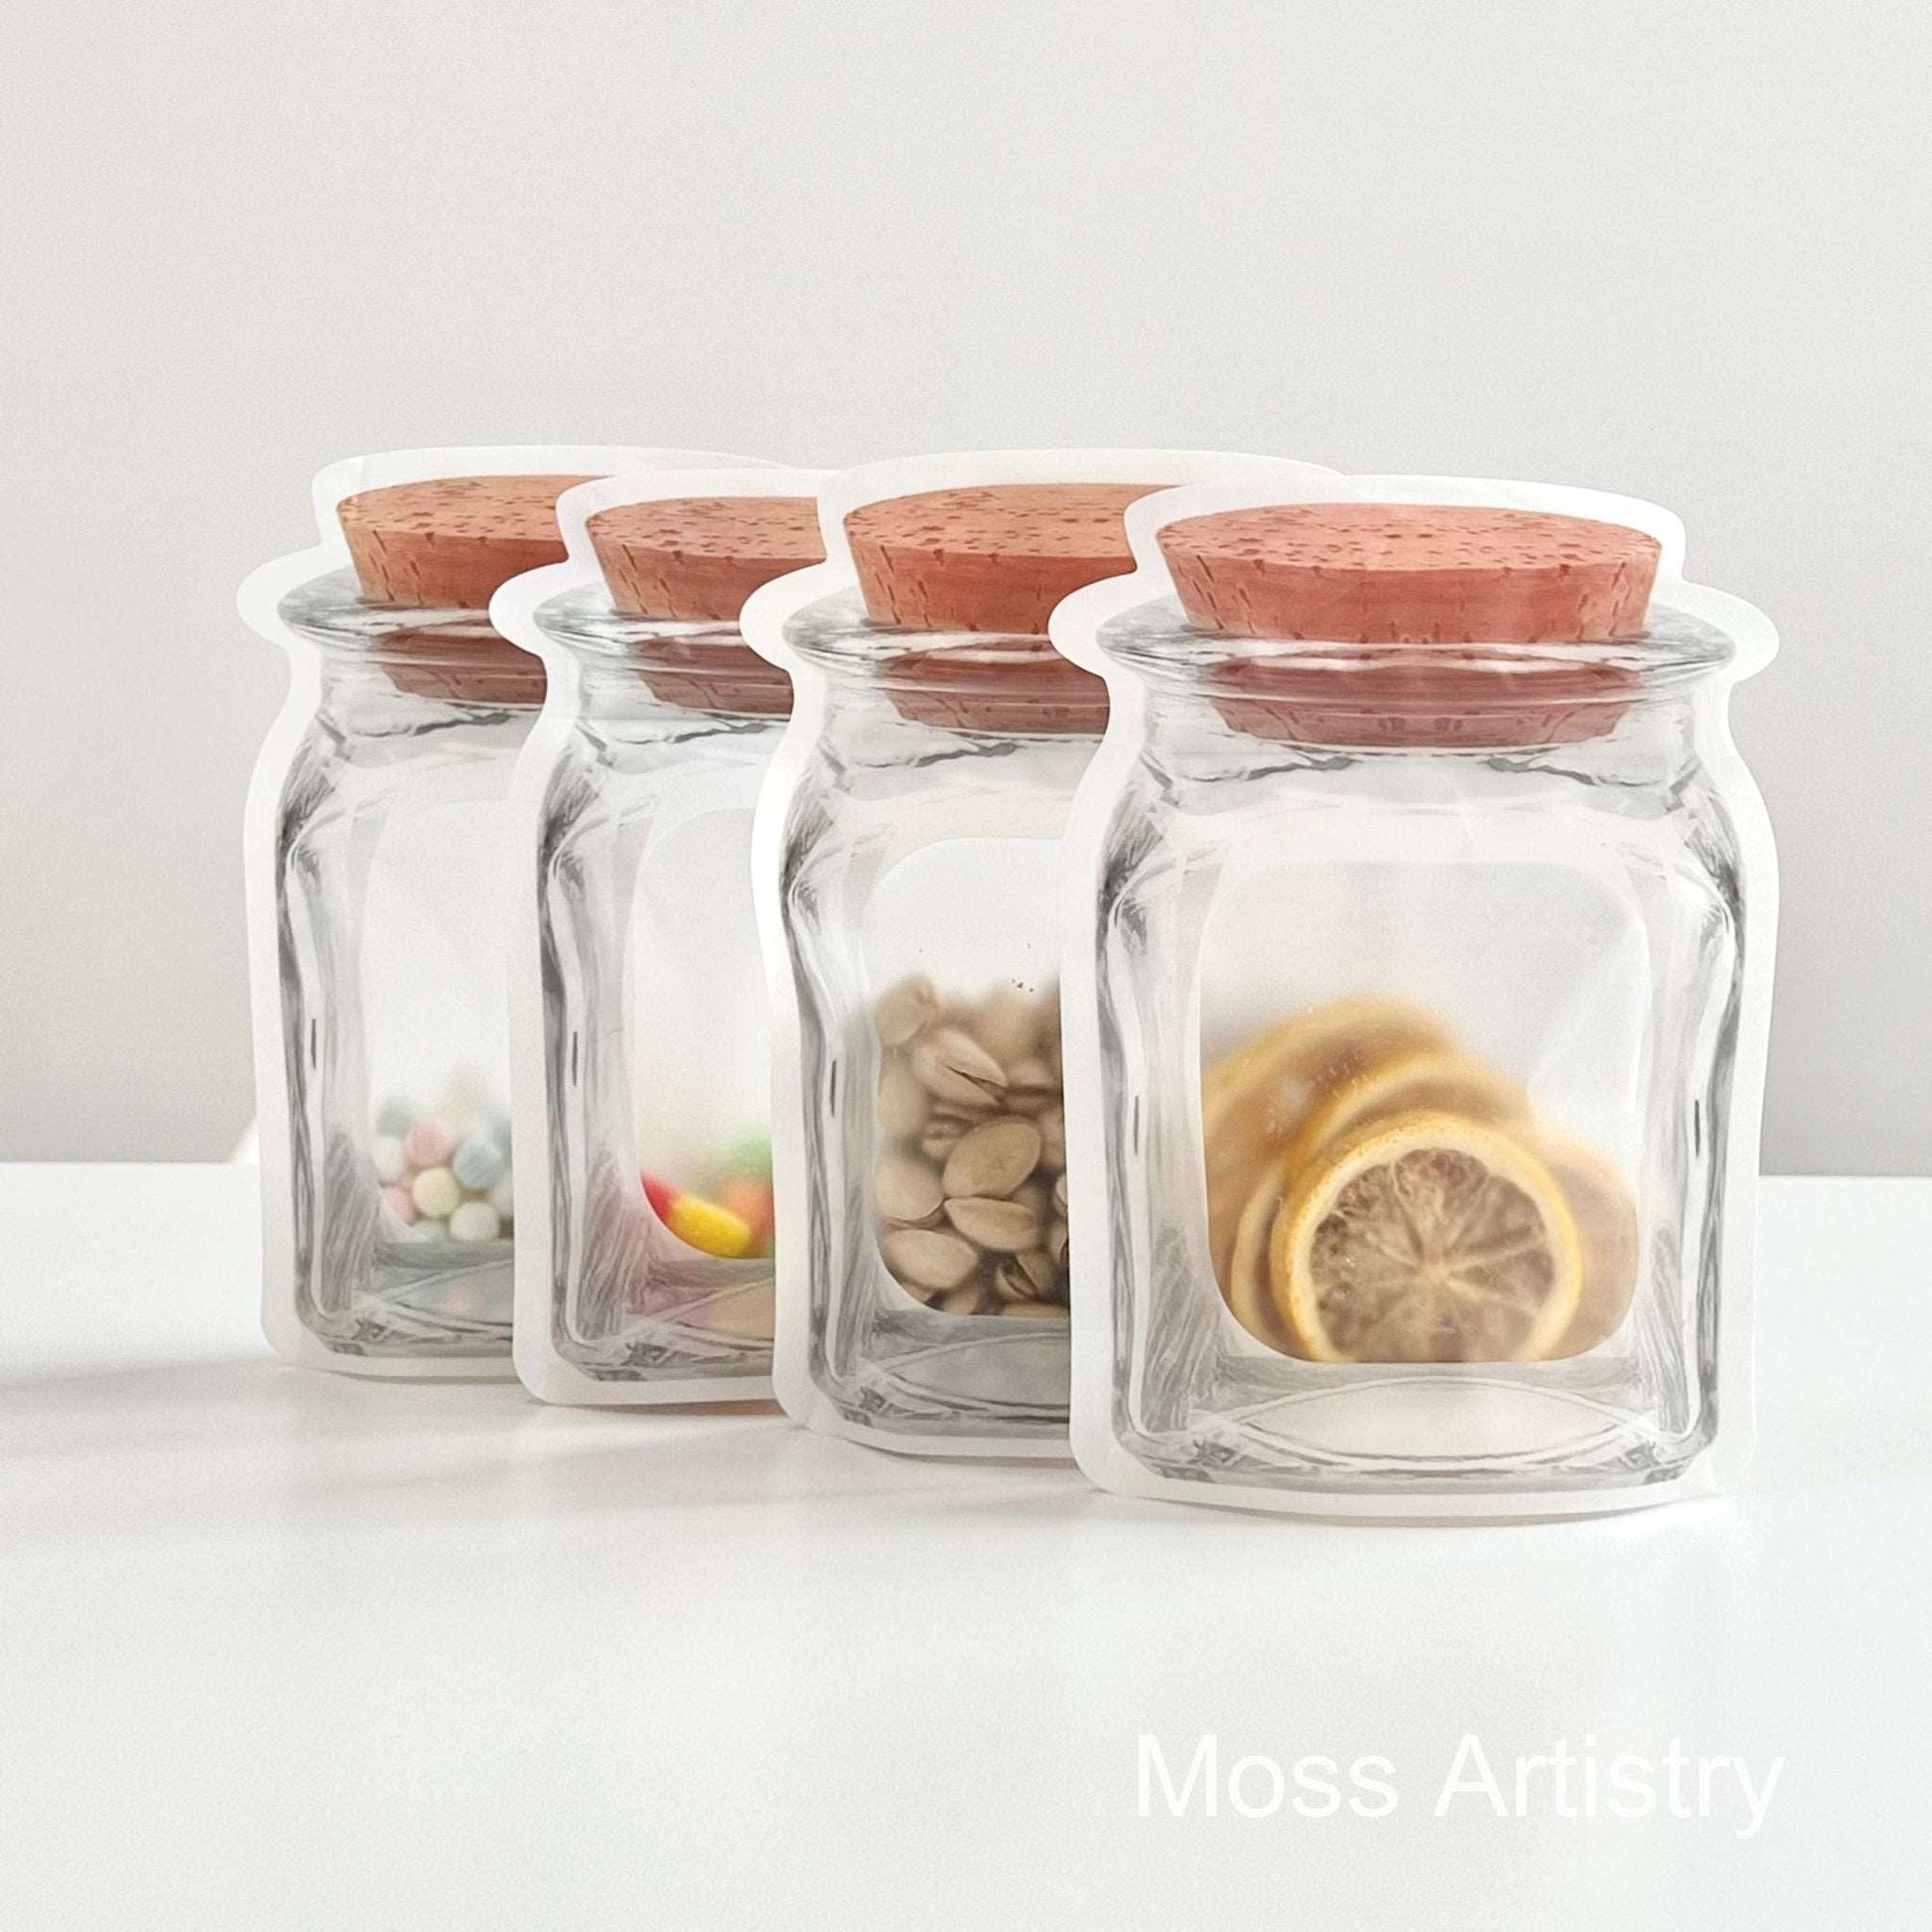 Reusable Airtight Mason Jar Ziplock Bags - Food Storage Solution with 
AIRTIGHT ZIPLOCK DESIGN:
Our reusable jar bags feature an airtight zipper design that effectively prevents air from entering the bag. With its smellproof and moistu